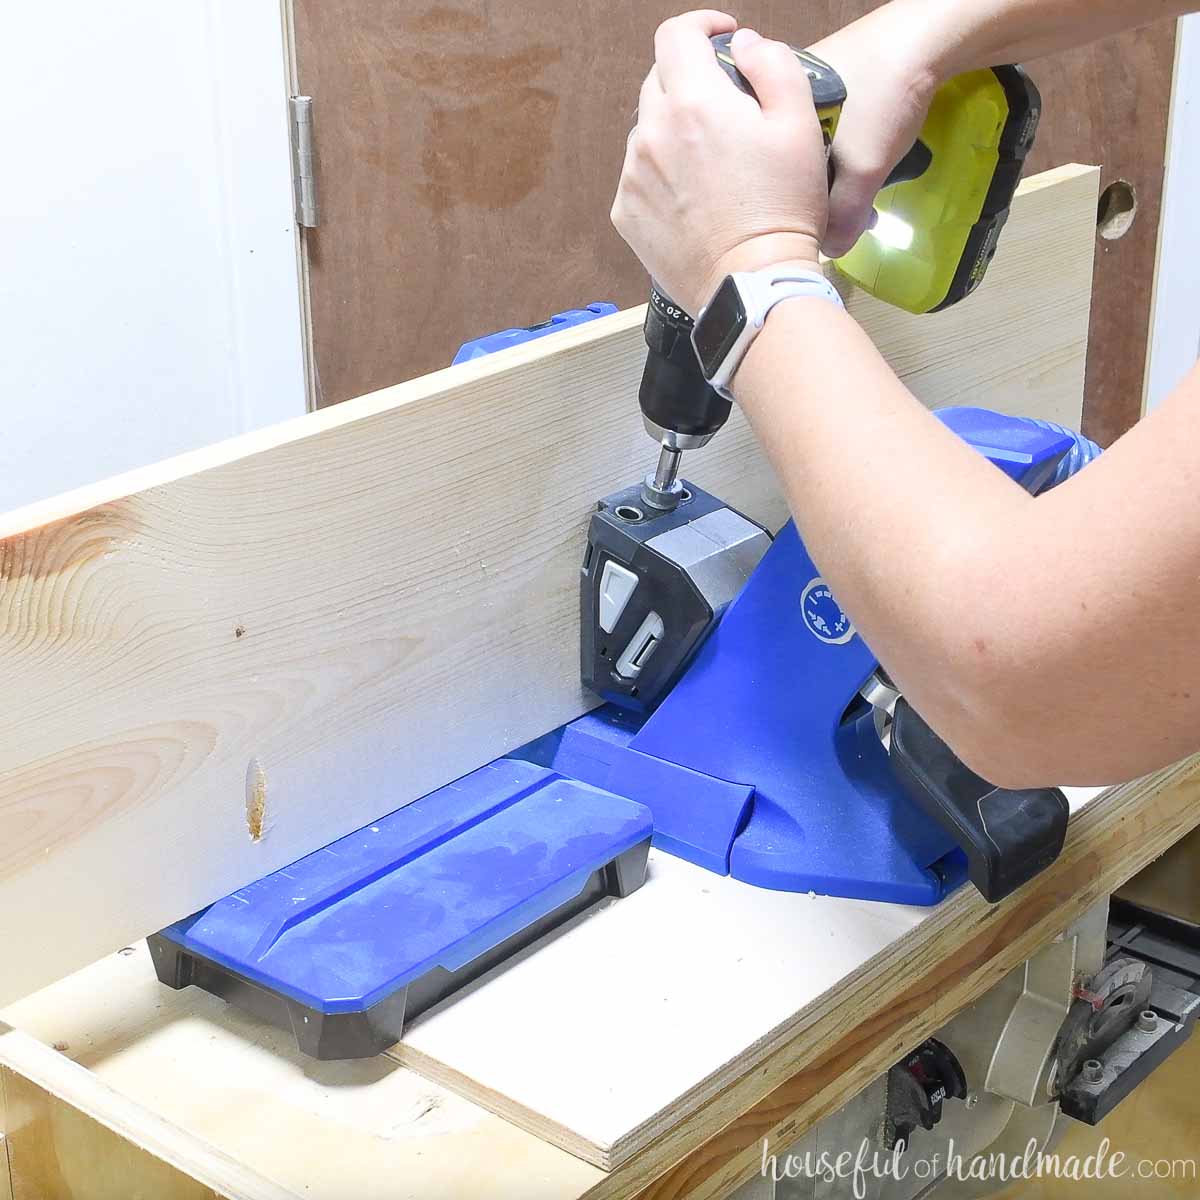 Drilling pocket holes with the Kreg jig. 